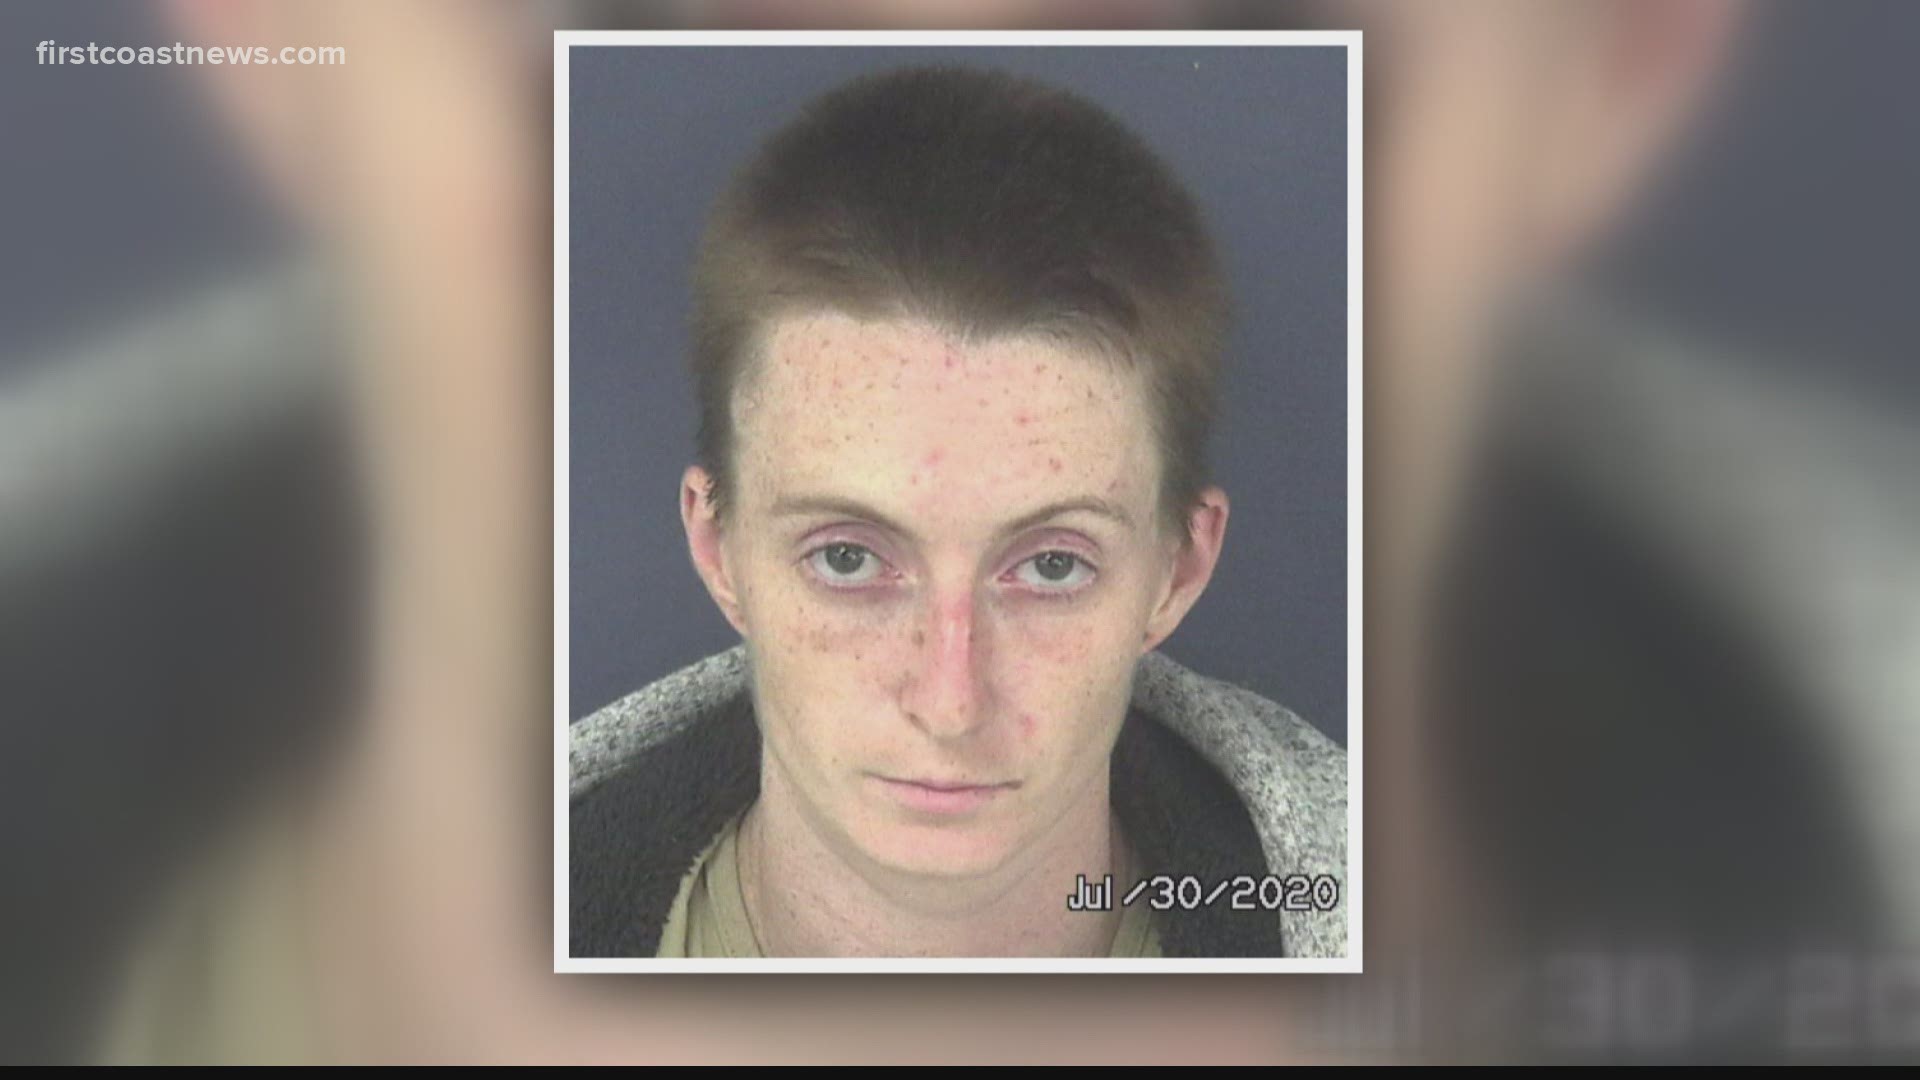 Shari Lynn Smith, 25, is facing a 2nd degree murder charge in the death of her husband